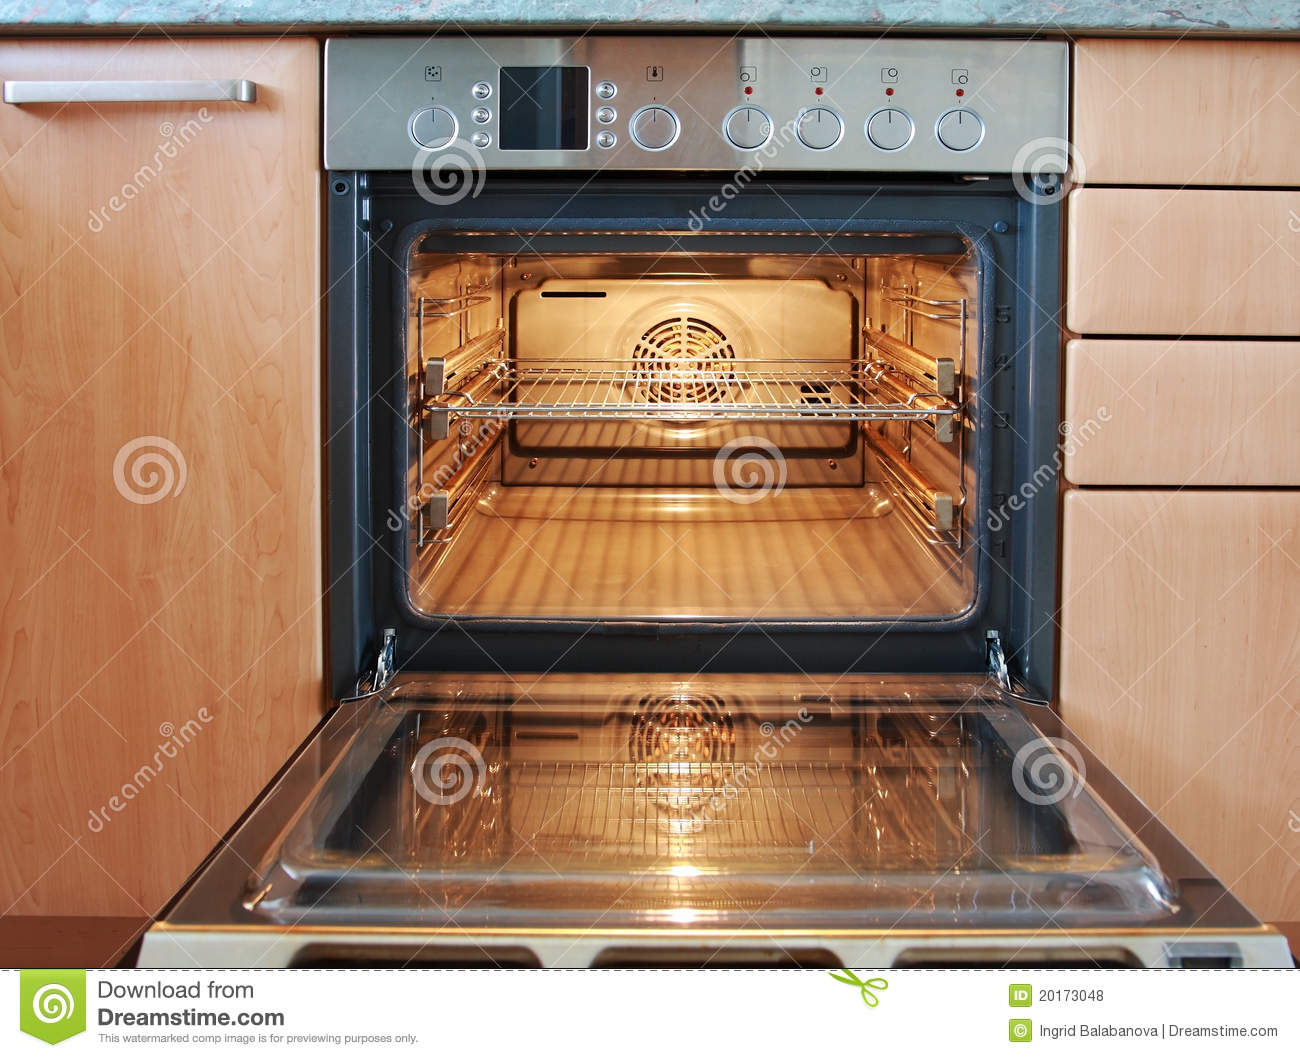 Open Oven Royalty Free Stock Photos   Image  20173048